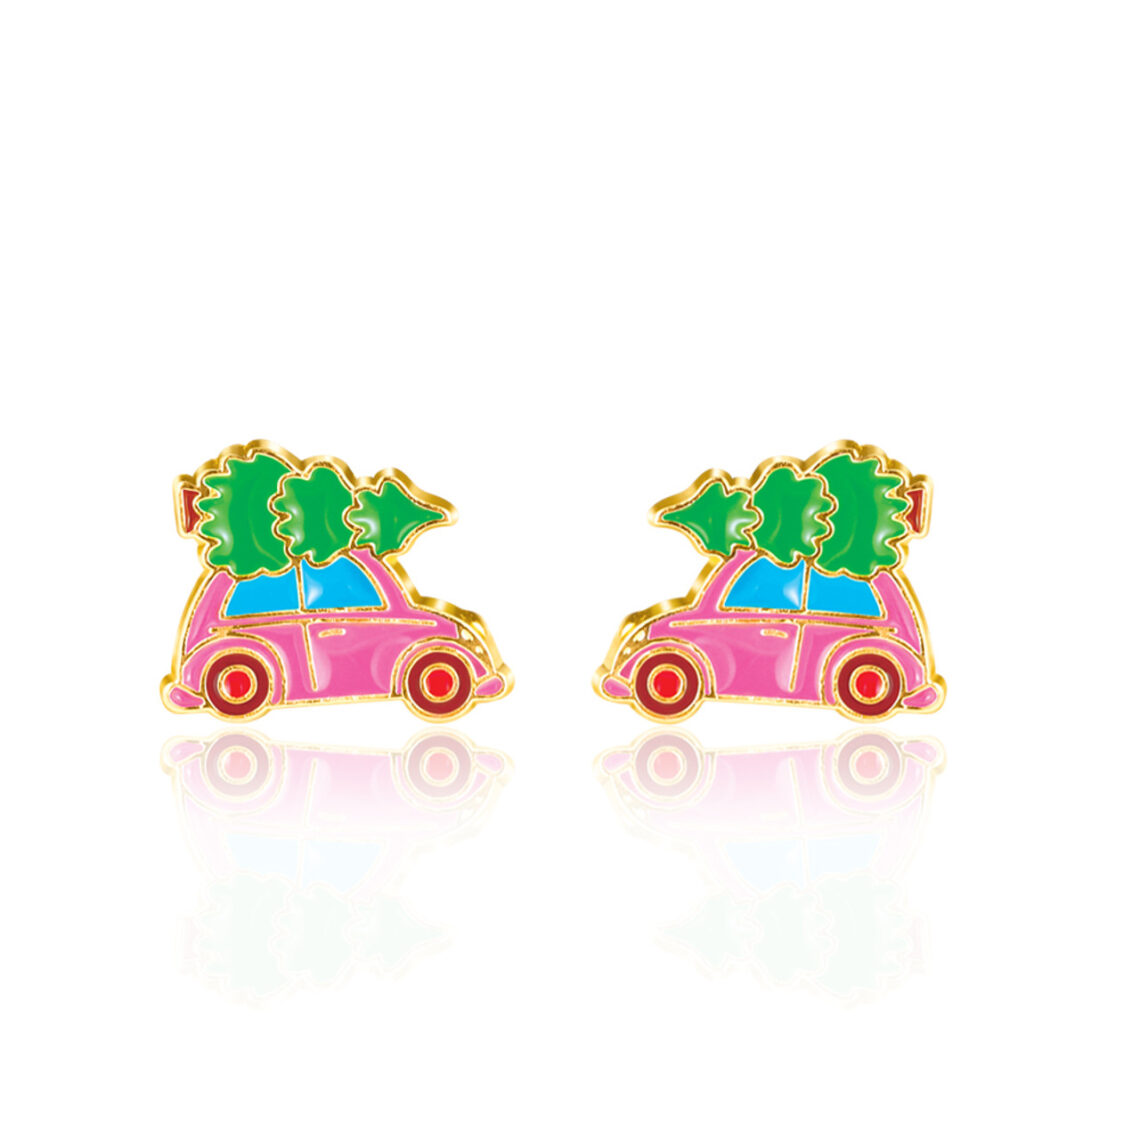 Deck the Halls with Dazzling Earrings: Girl Nation Jewelry Festive Christmas Tree Shopping Cutie Studs 10